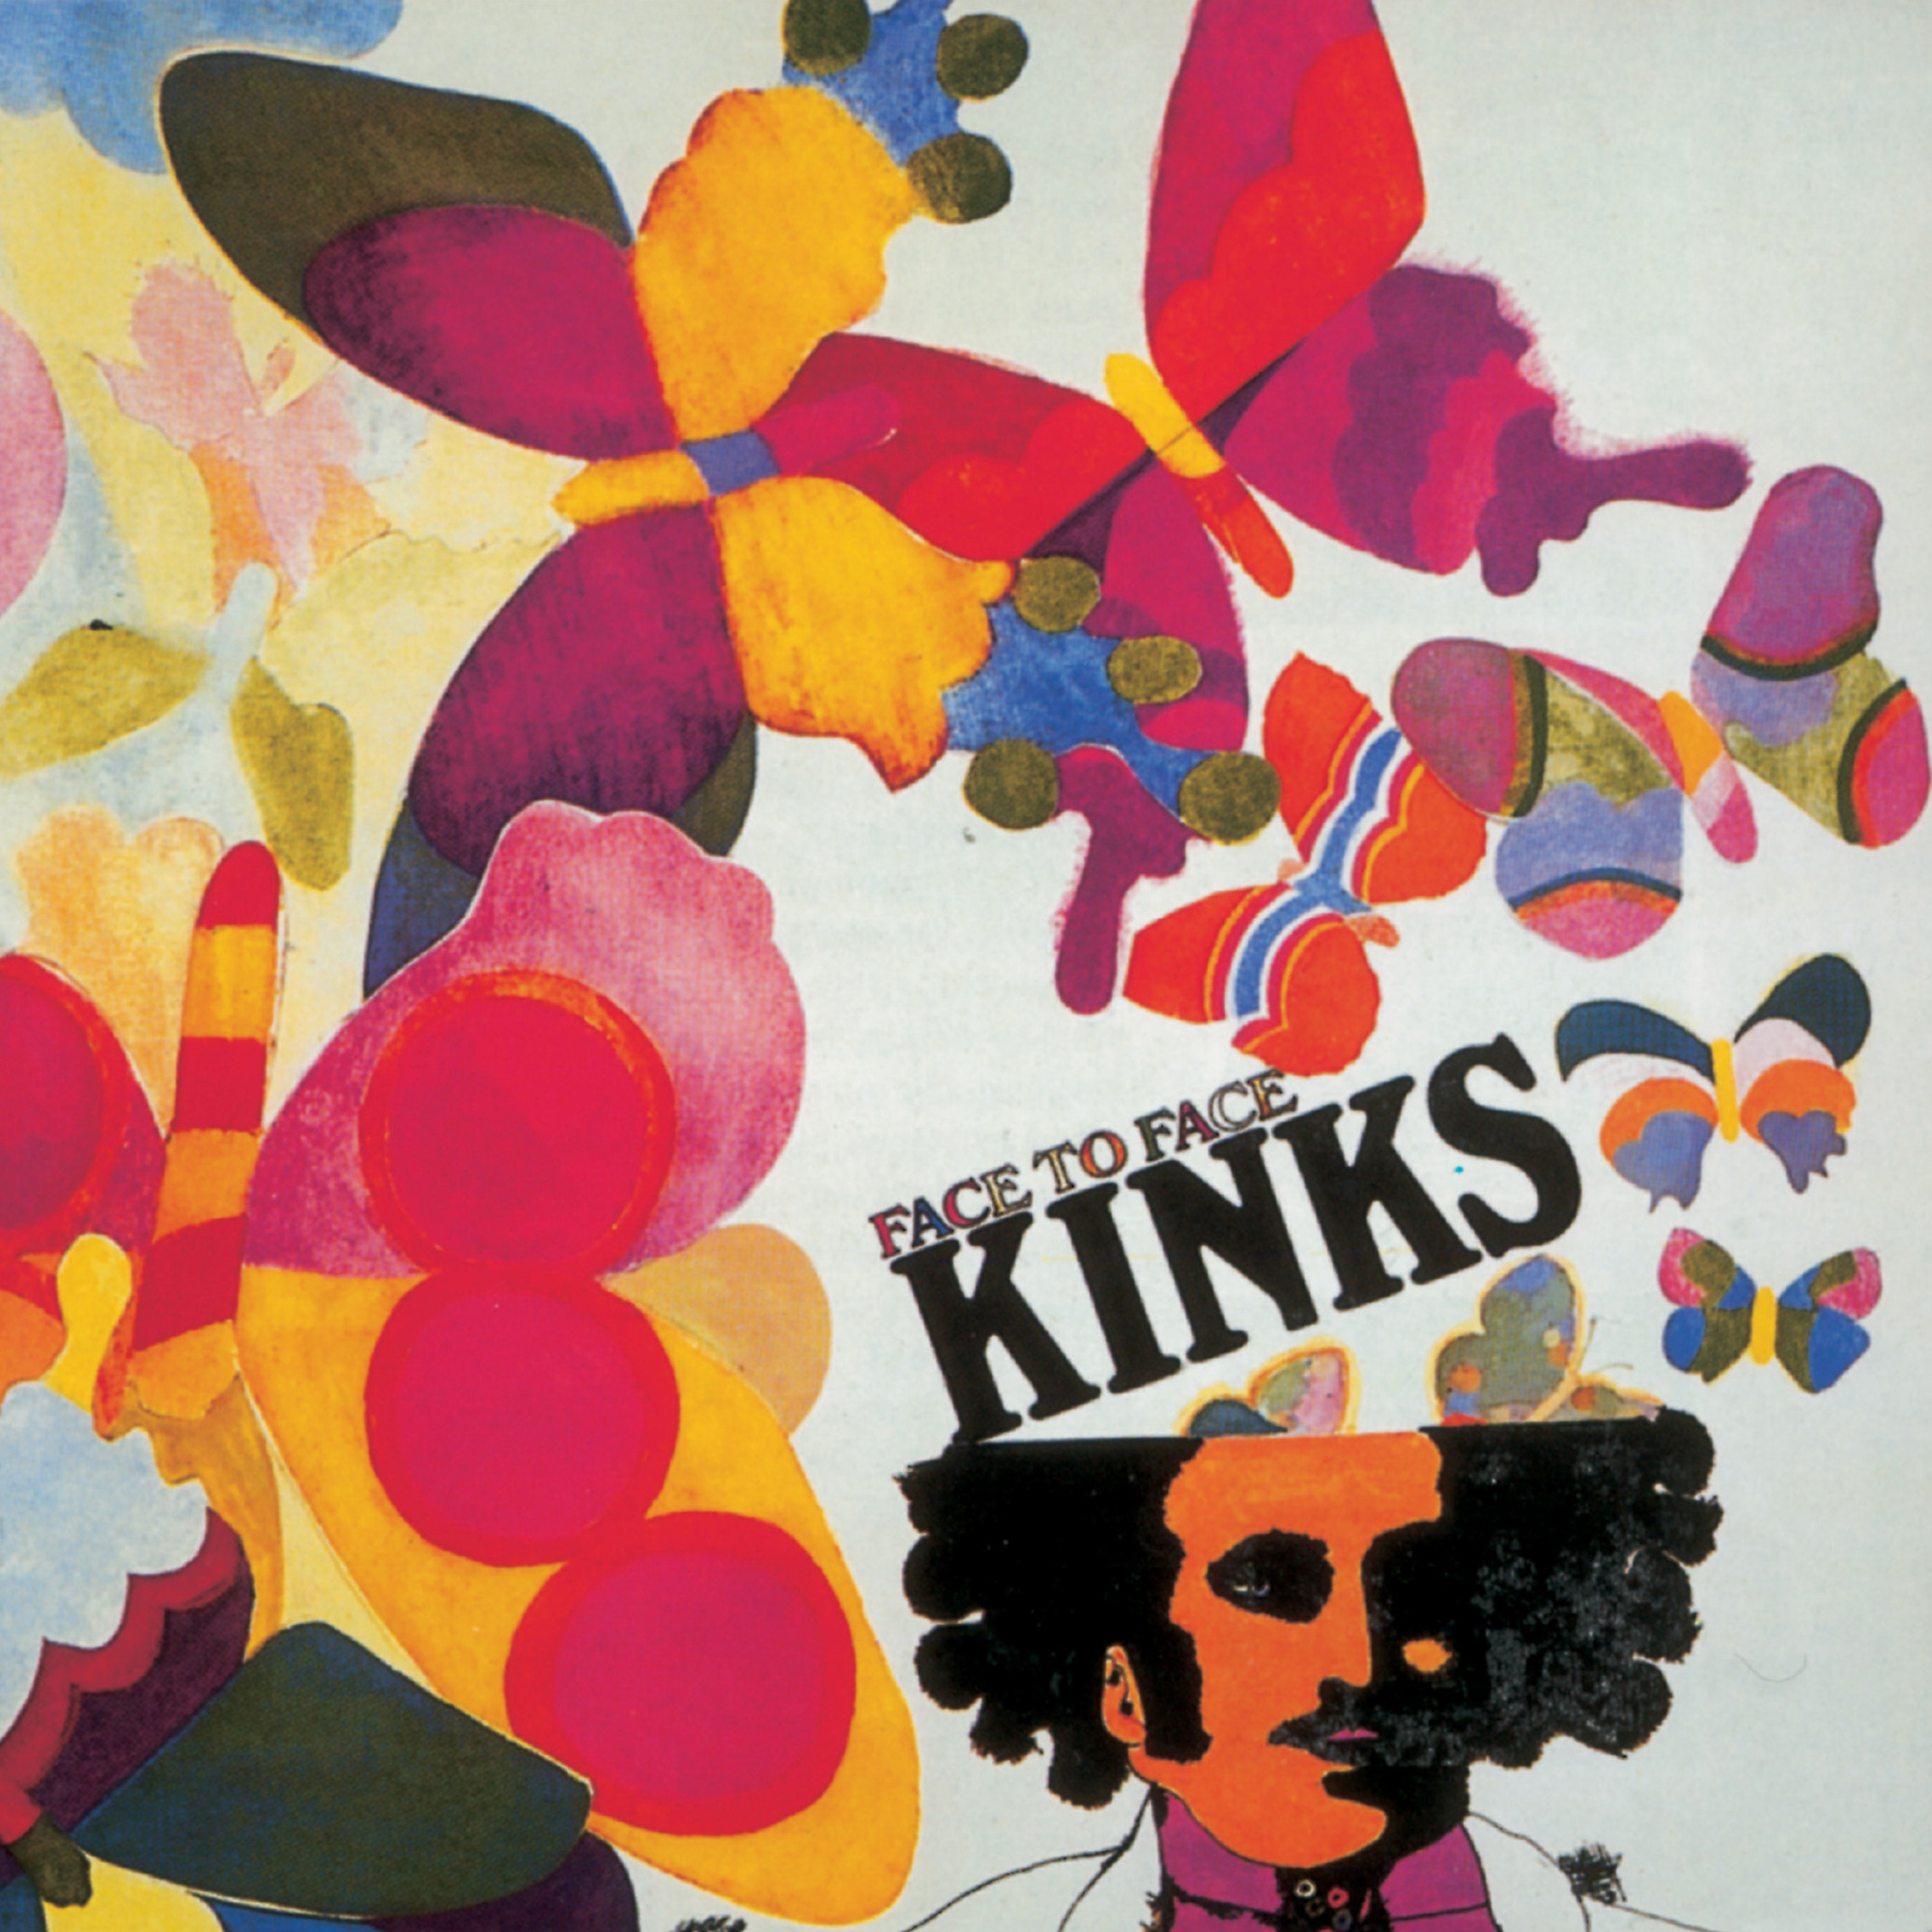 The cover of The Kinks's album 